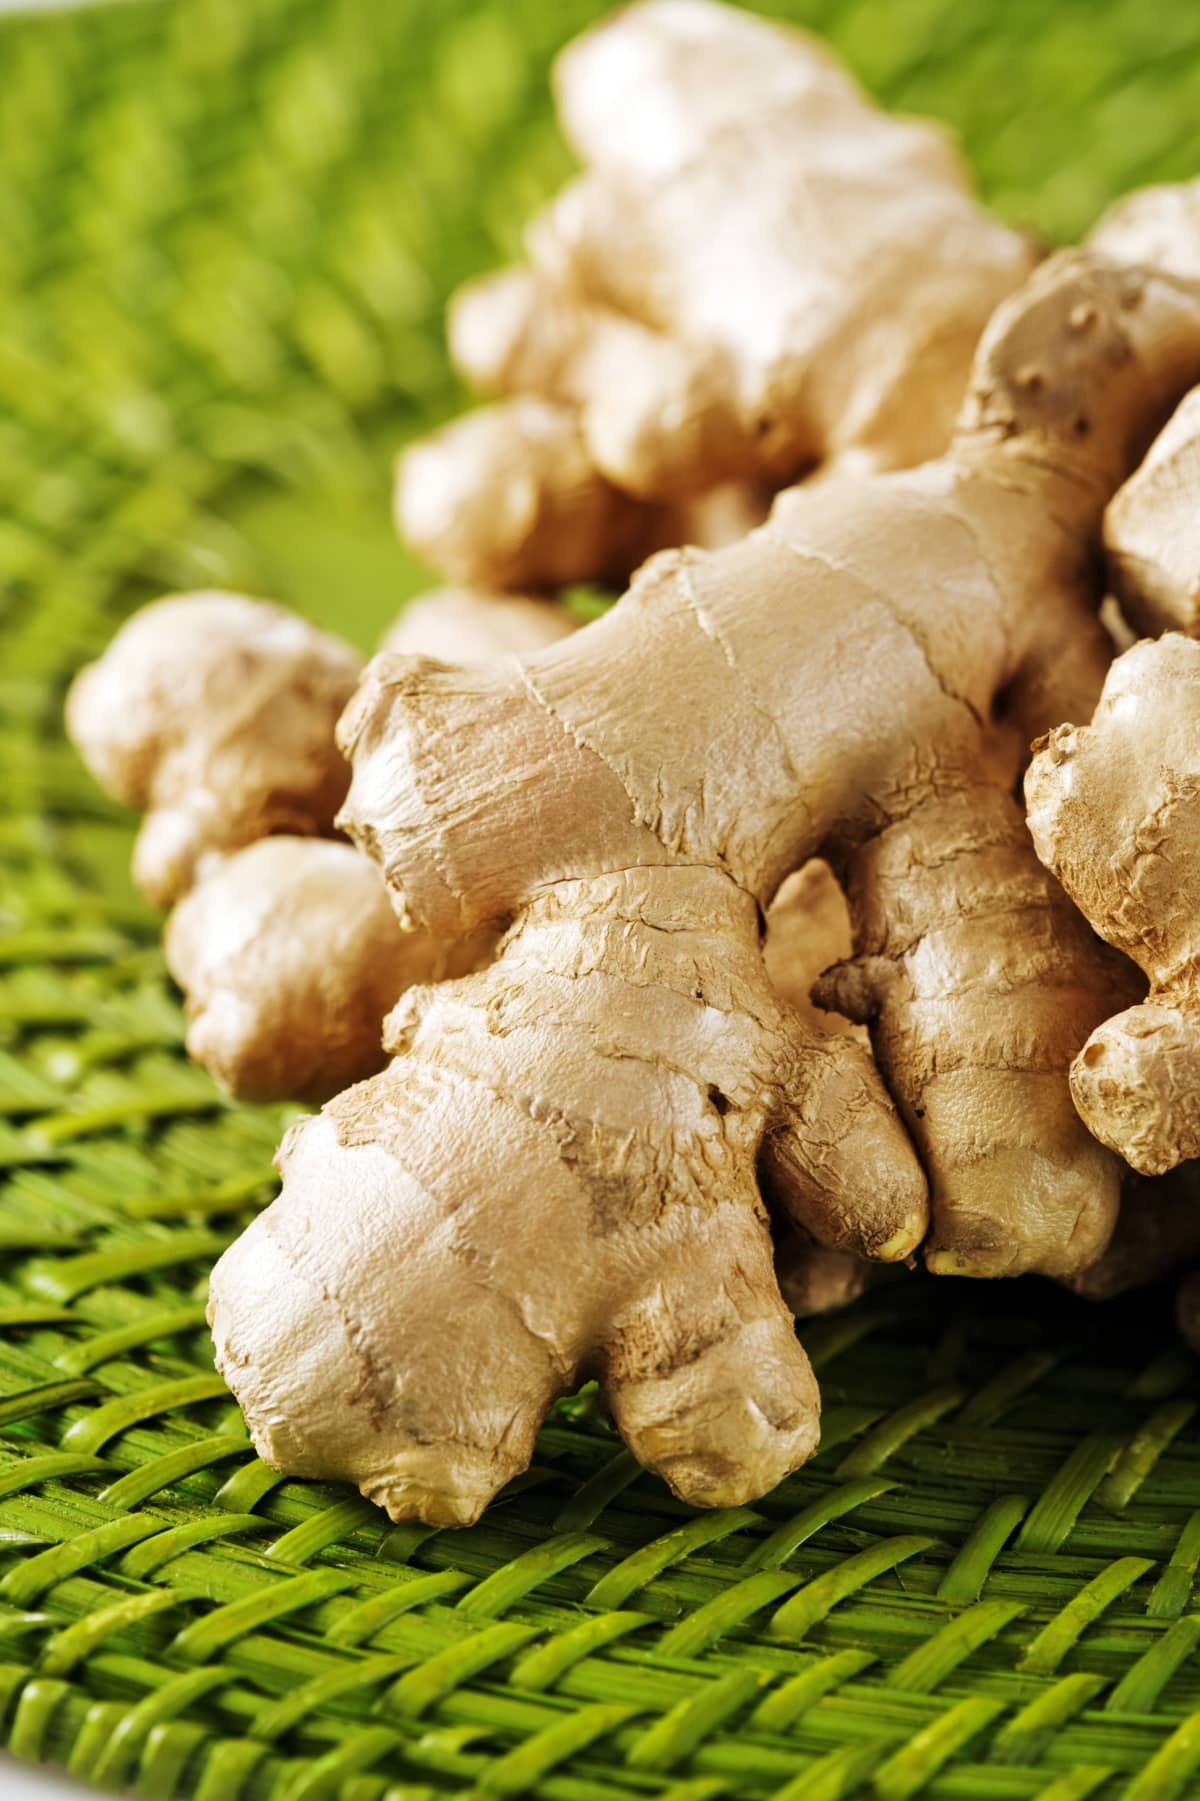 Piles of ginger roots on green placemat